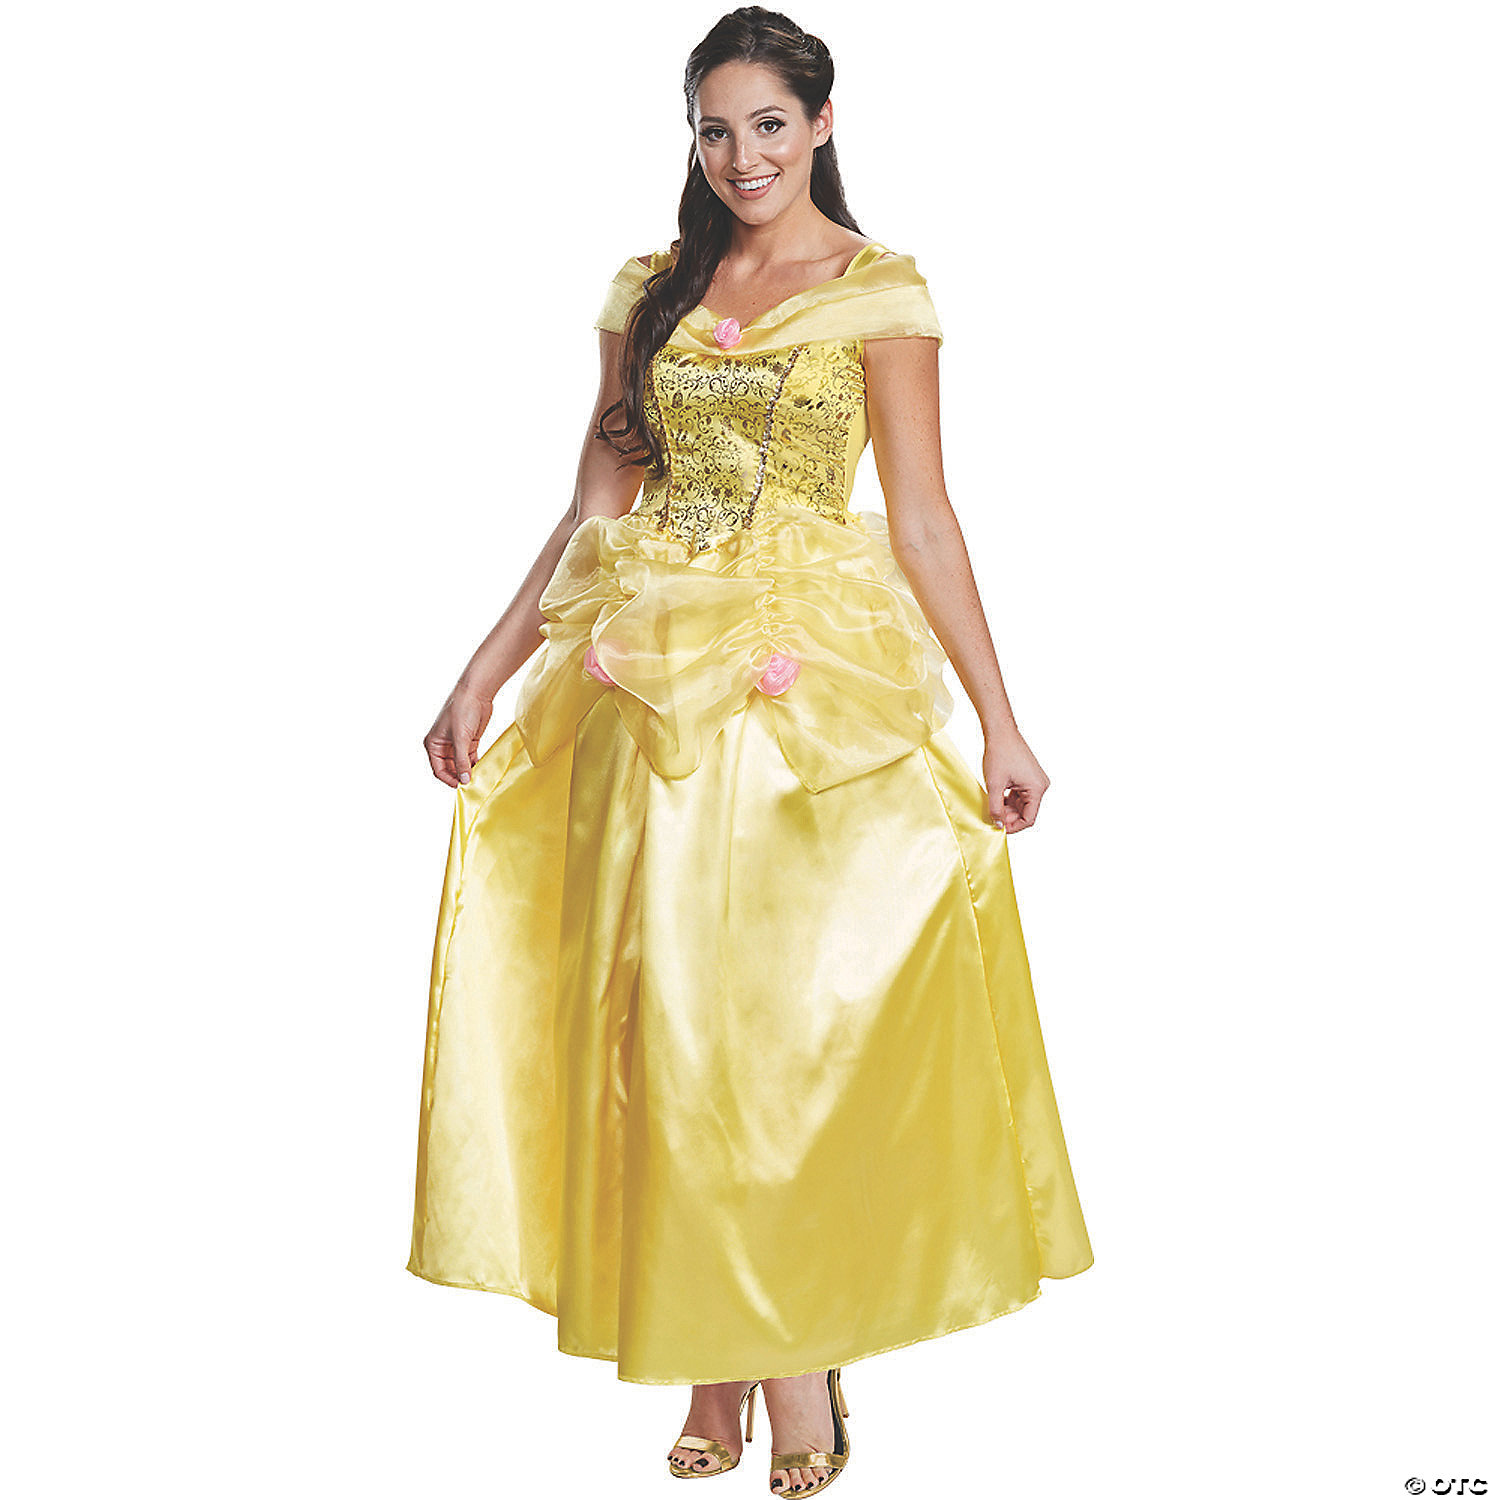 Strait thong hole bias Women's Deluxe Beauty and the Beast Belle Costume | Oriental Trading